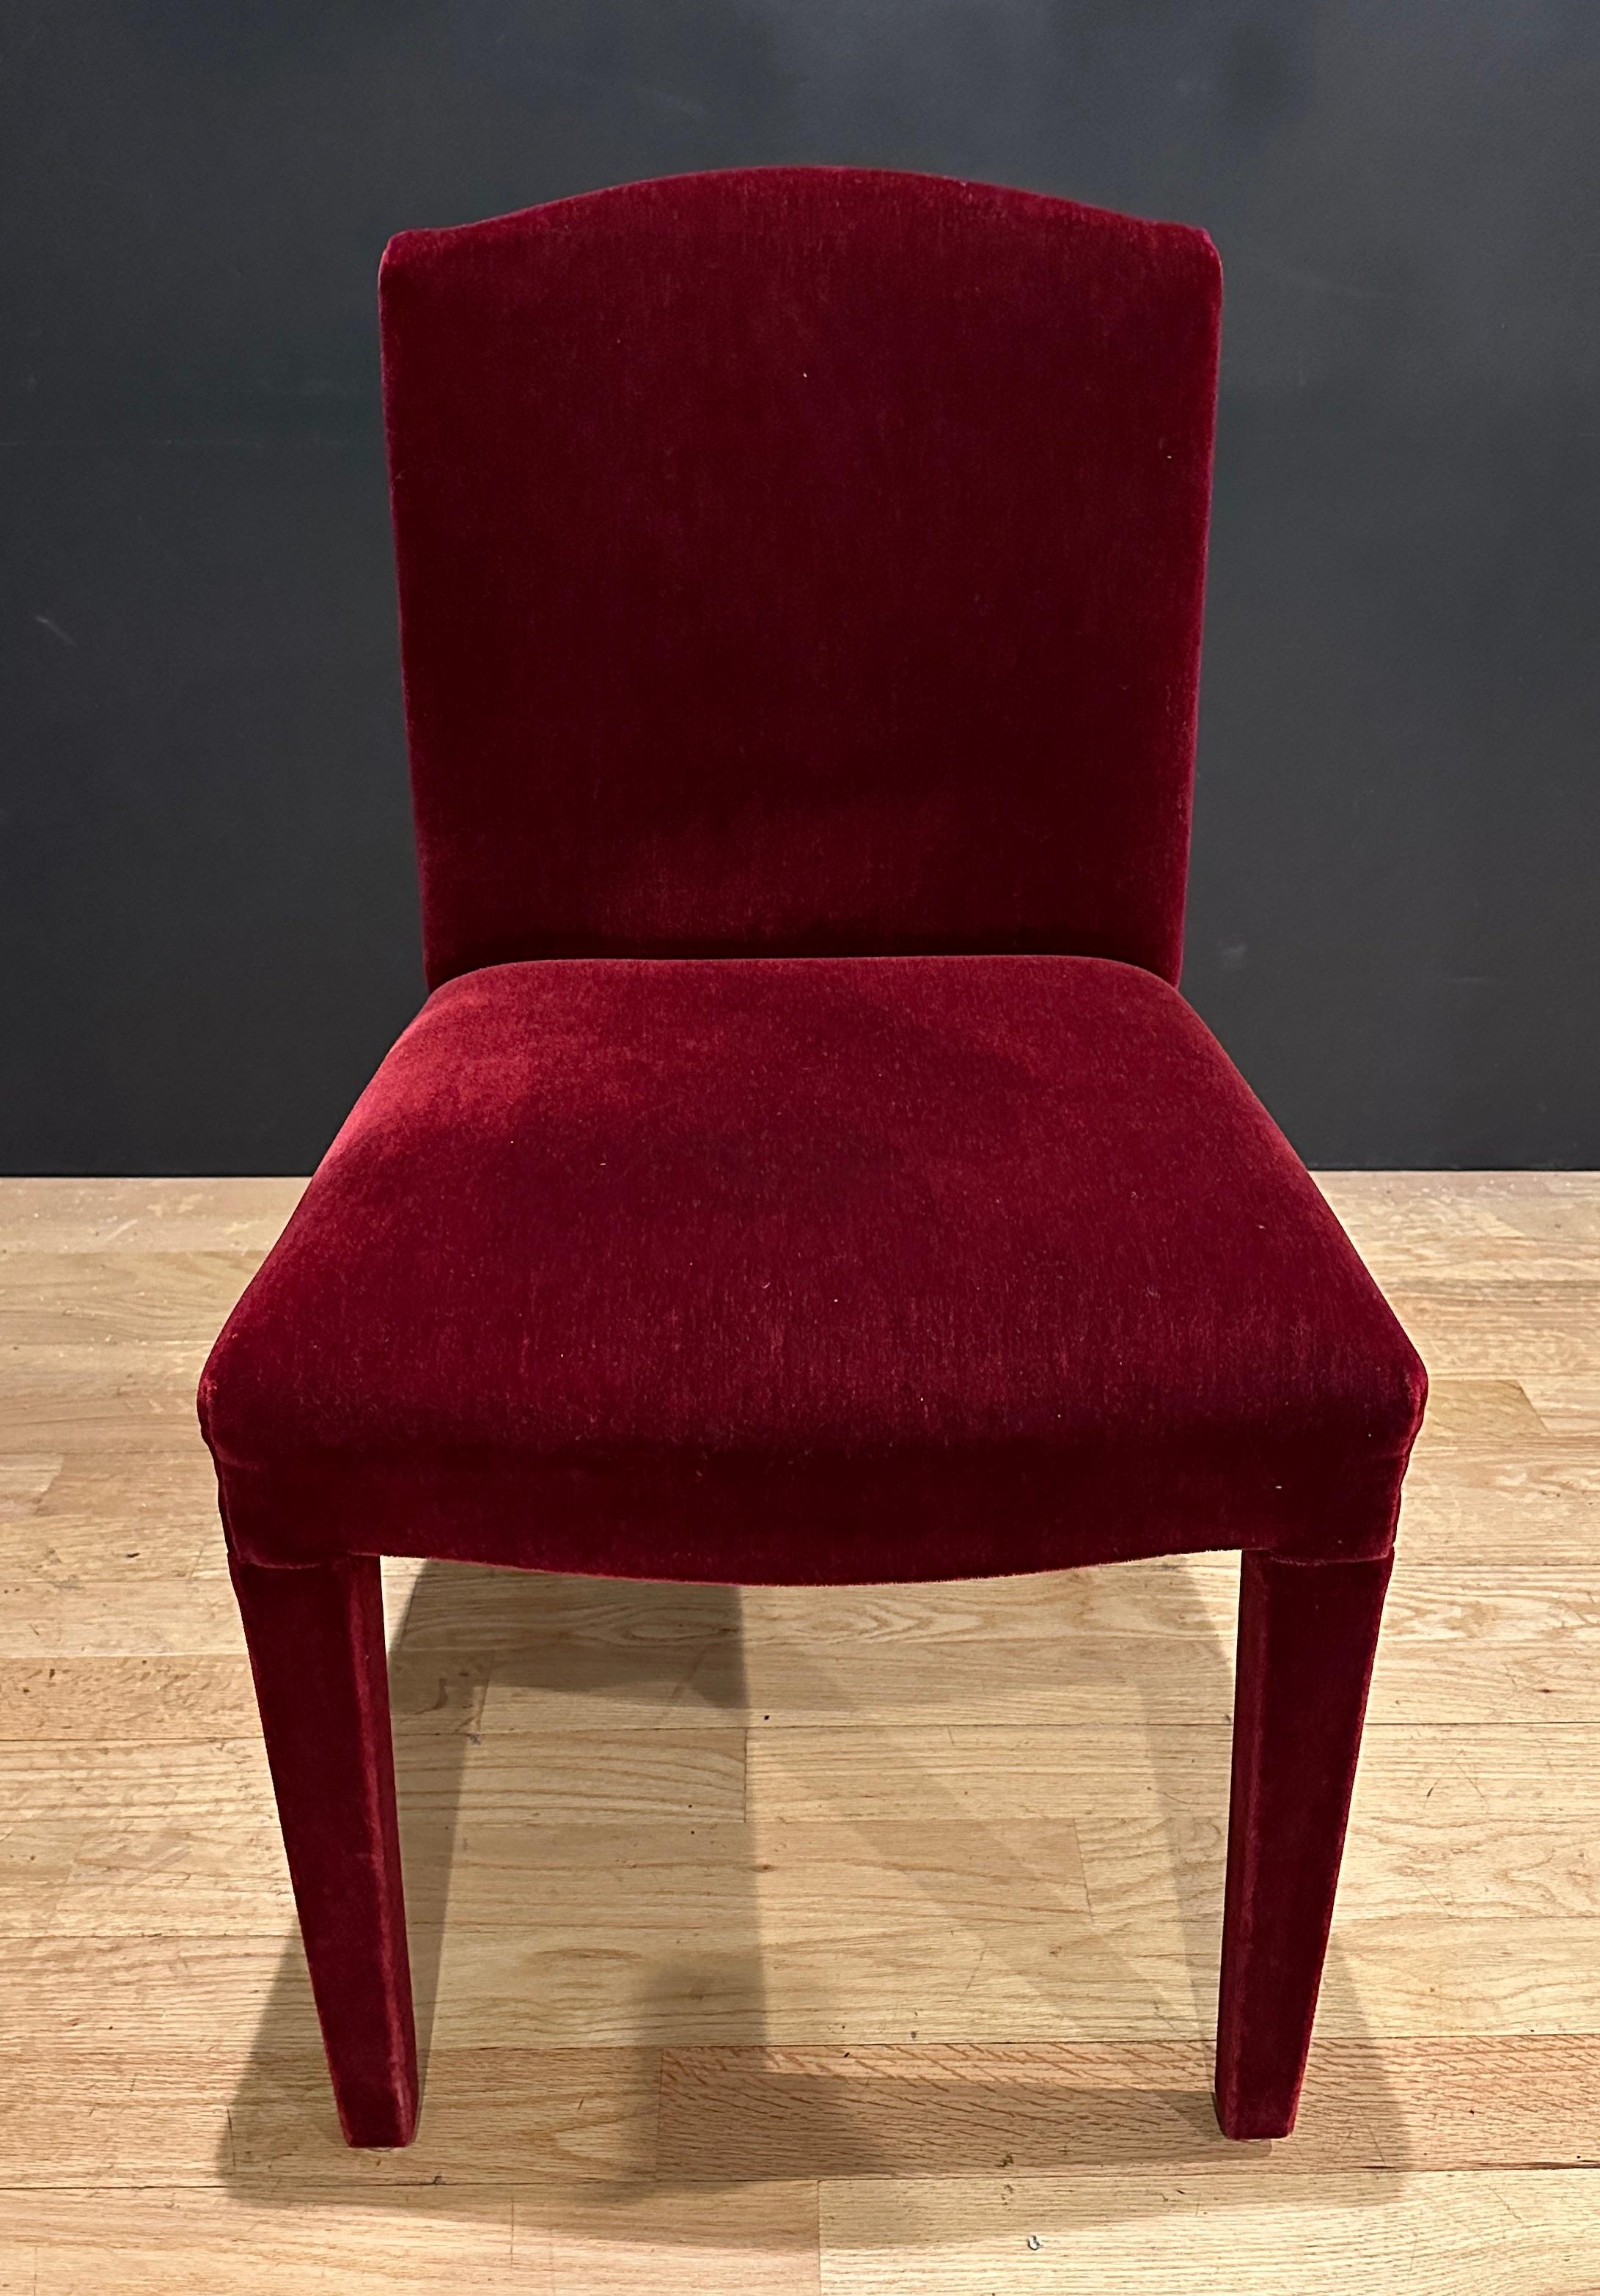 14 custom and finely upholstered , simple and tailored burgundy color mohair dining room chairs. Comfortable and beautiful.